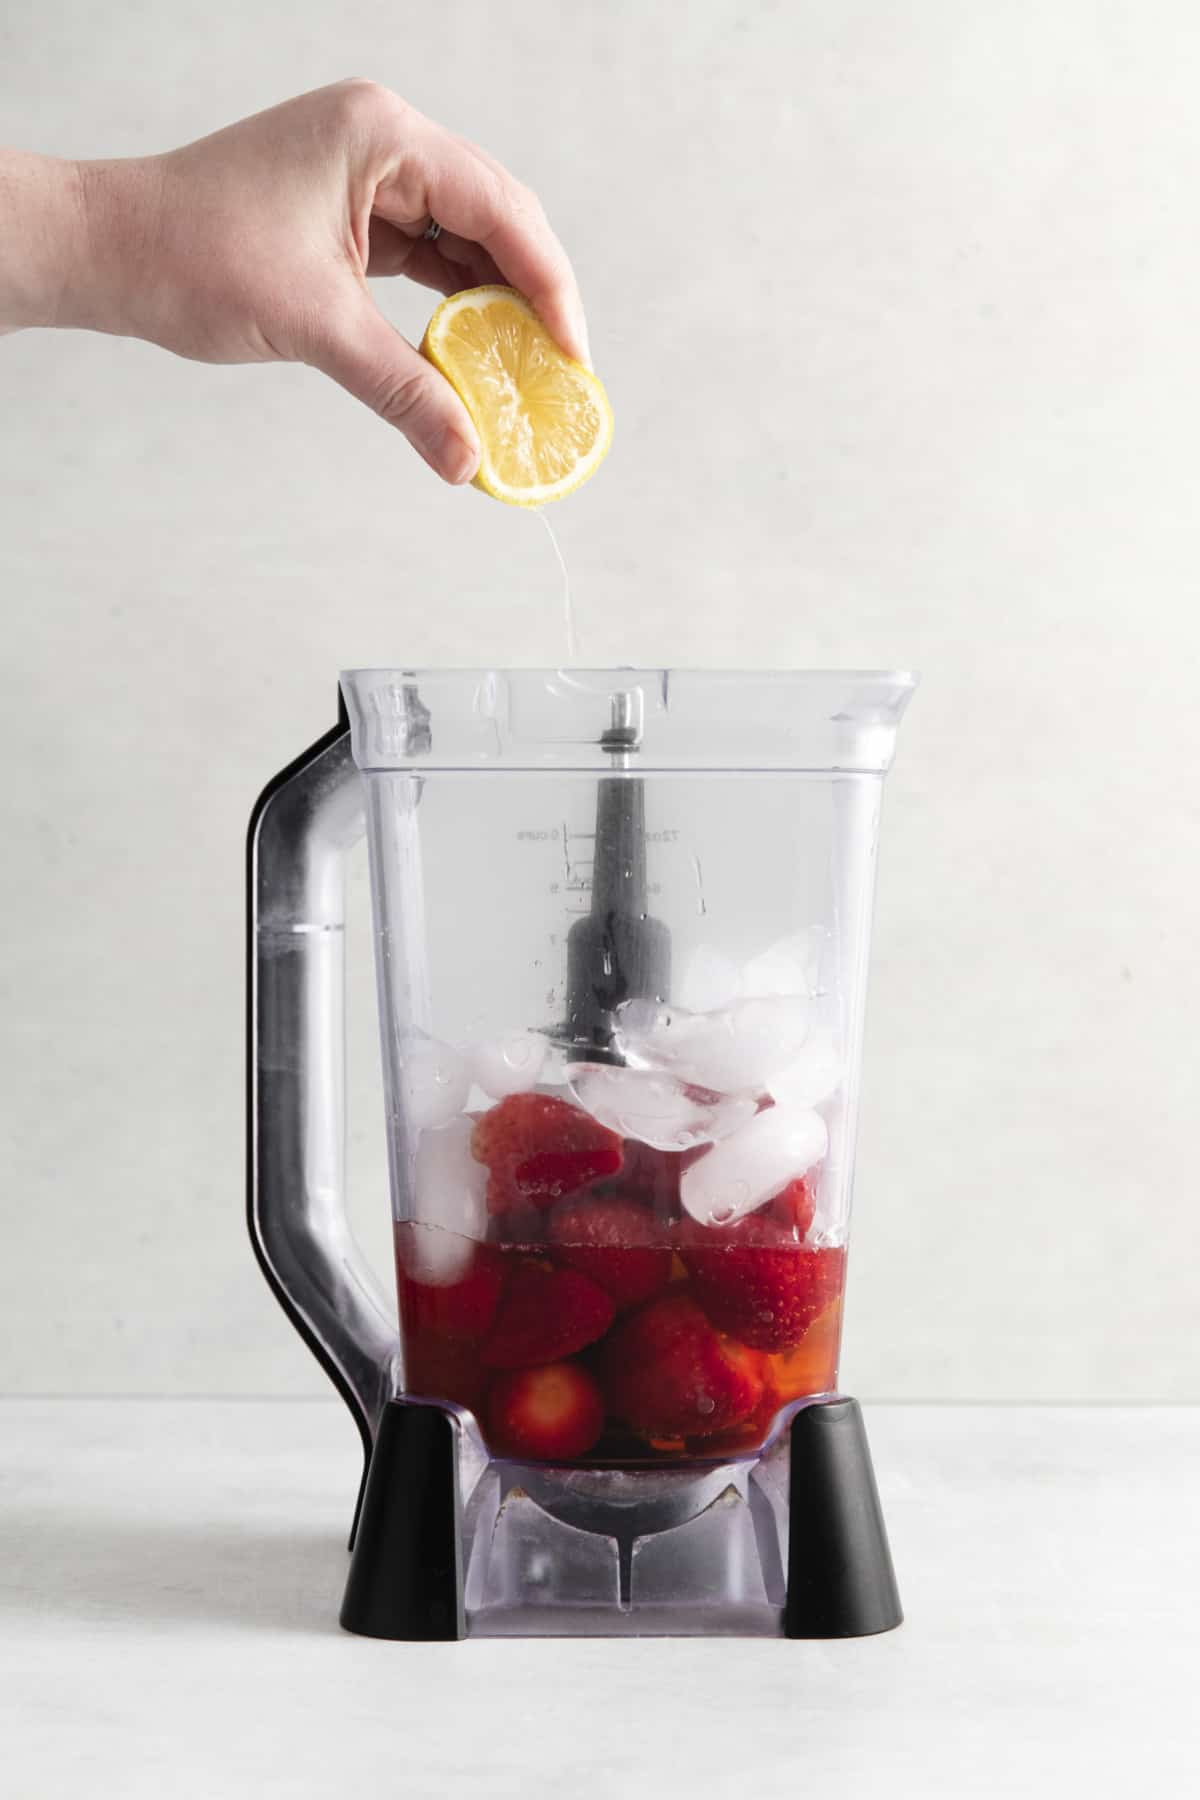 Fresh lemon is squeezed into a blender with strawberries and ice.